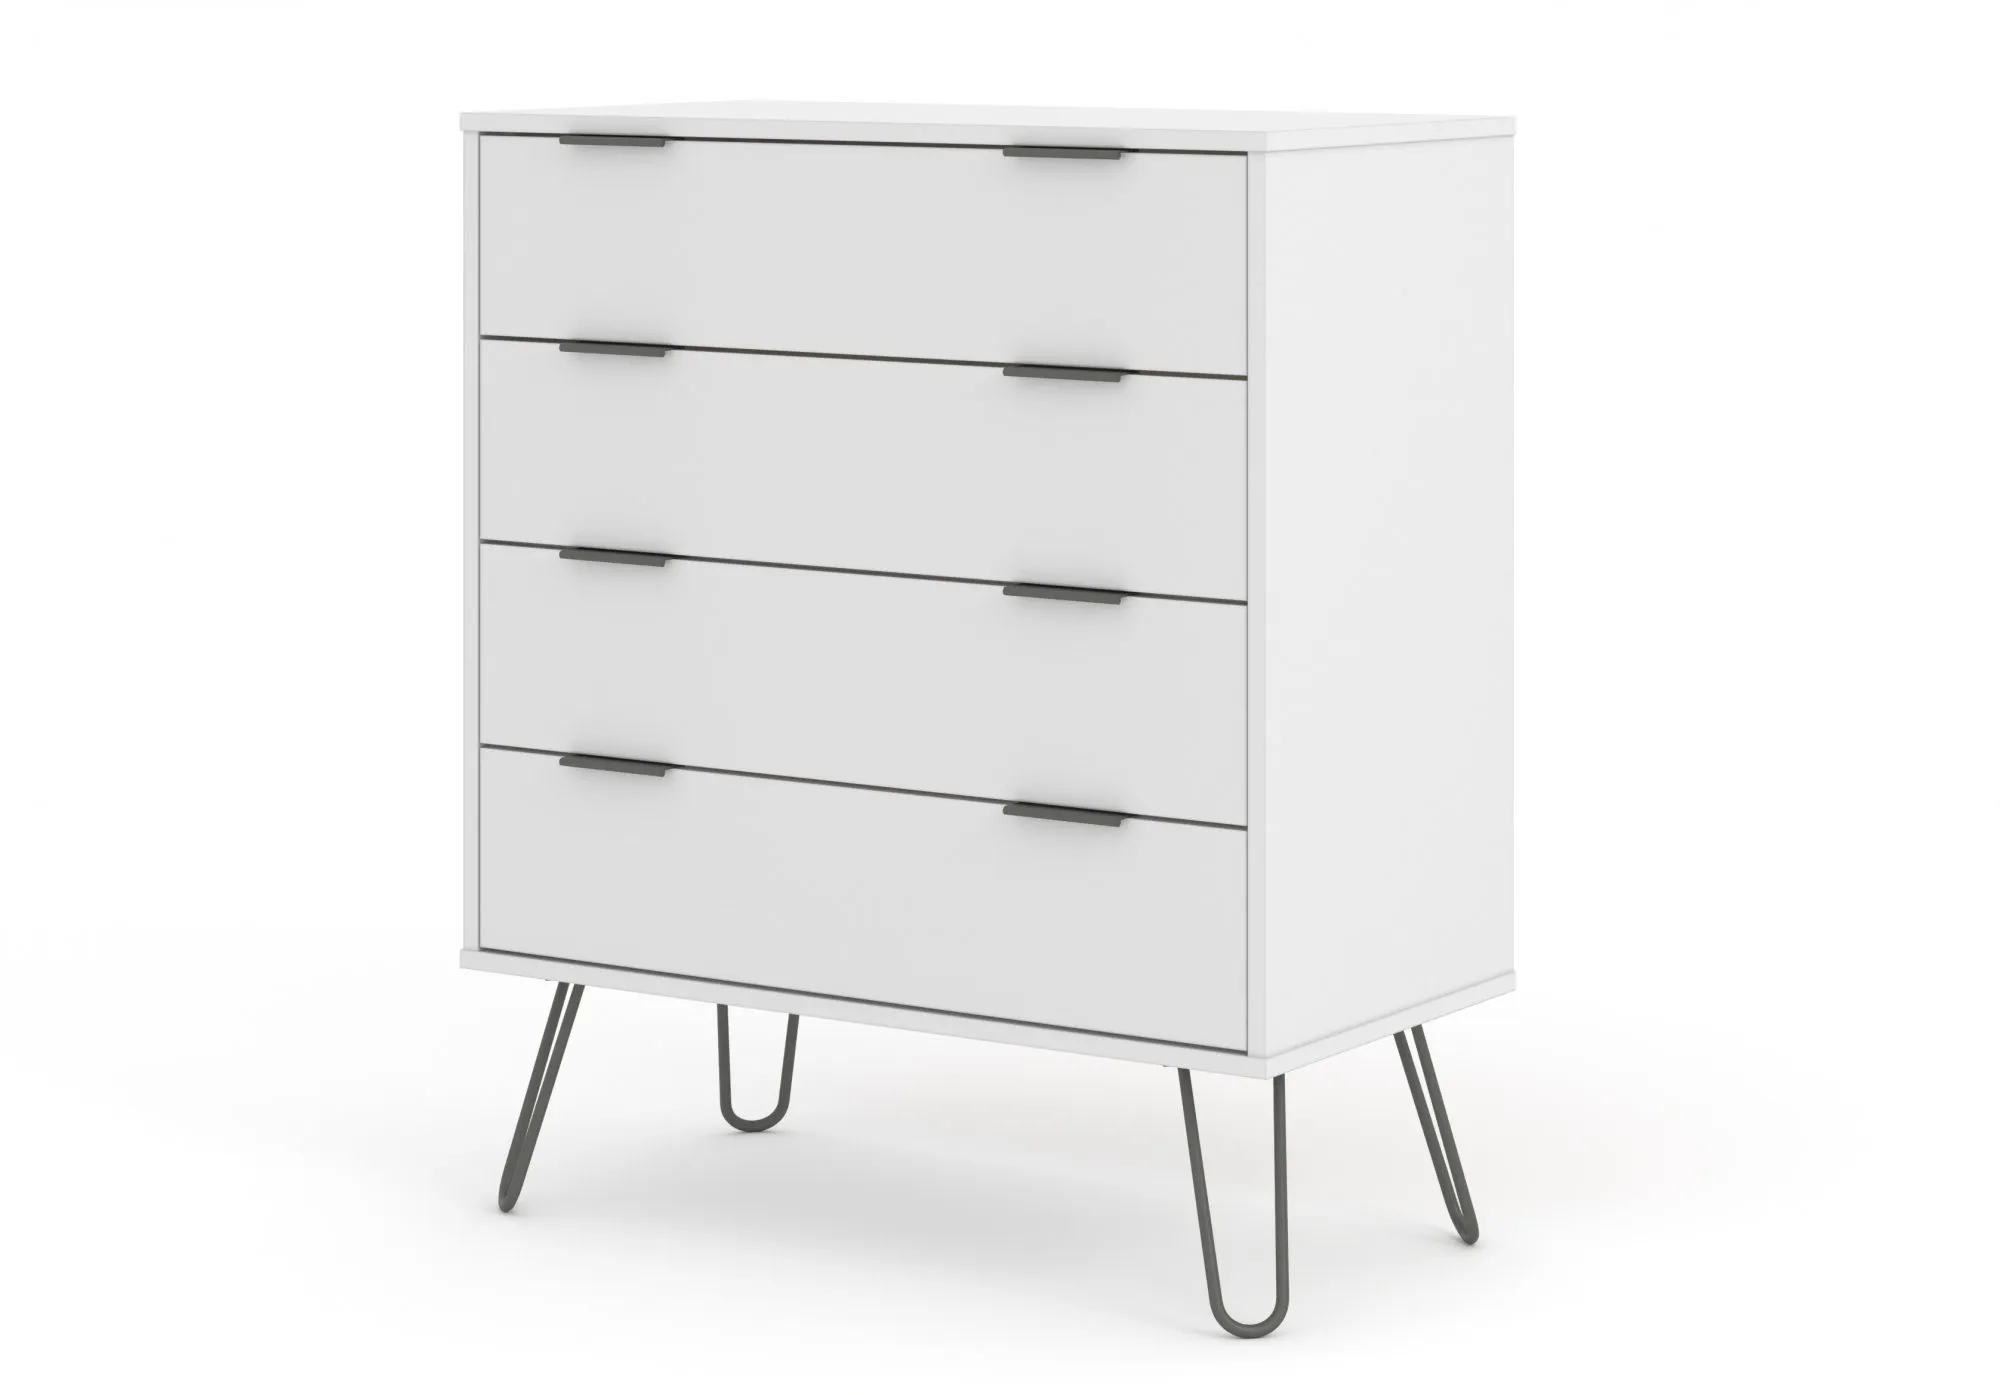 Core Products Core Augusta White 4 Drawer Chest of Drawers